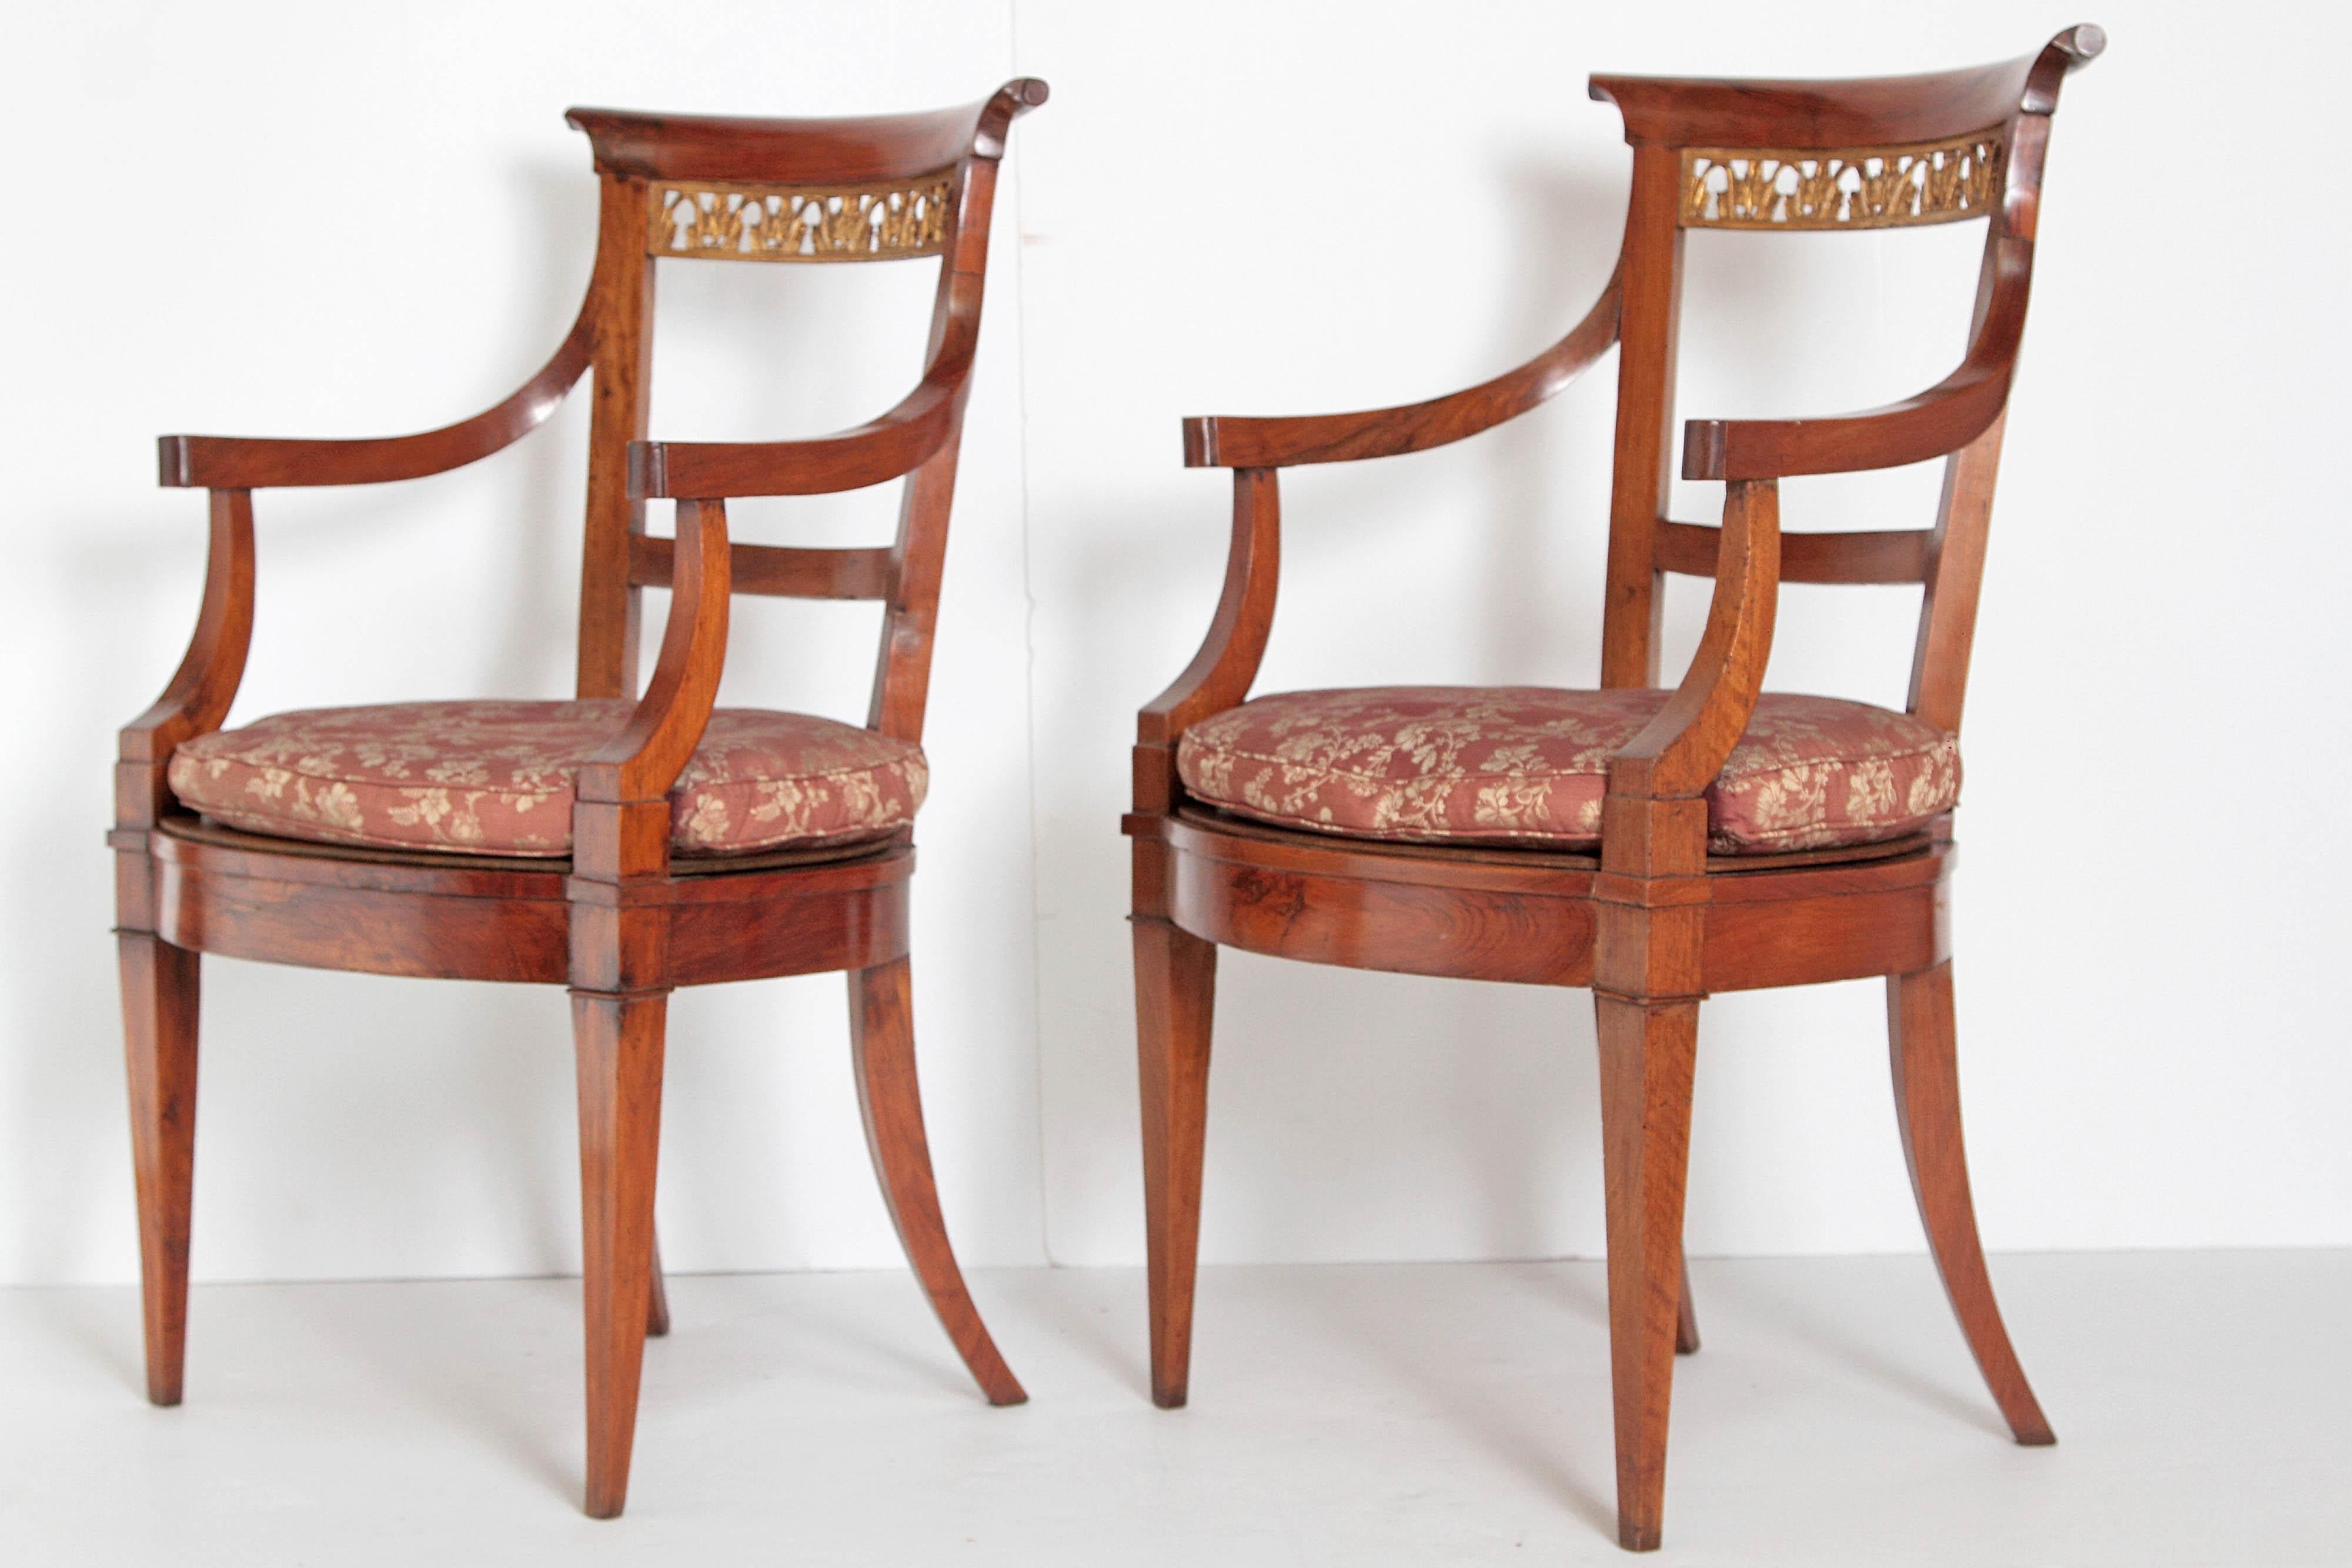 An elegant pair of neoclassical Italian walnut armchairs. A nicely carved crest rail with a gilded trellis. Loose cushion on seat and saber form rear legs with square taper front legs, early 19th century, circa 1810, Italy.